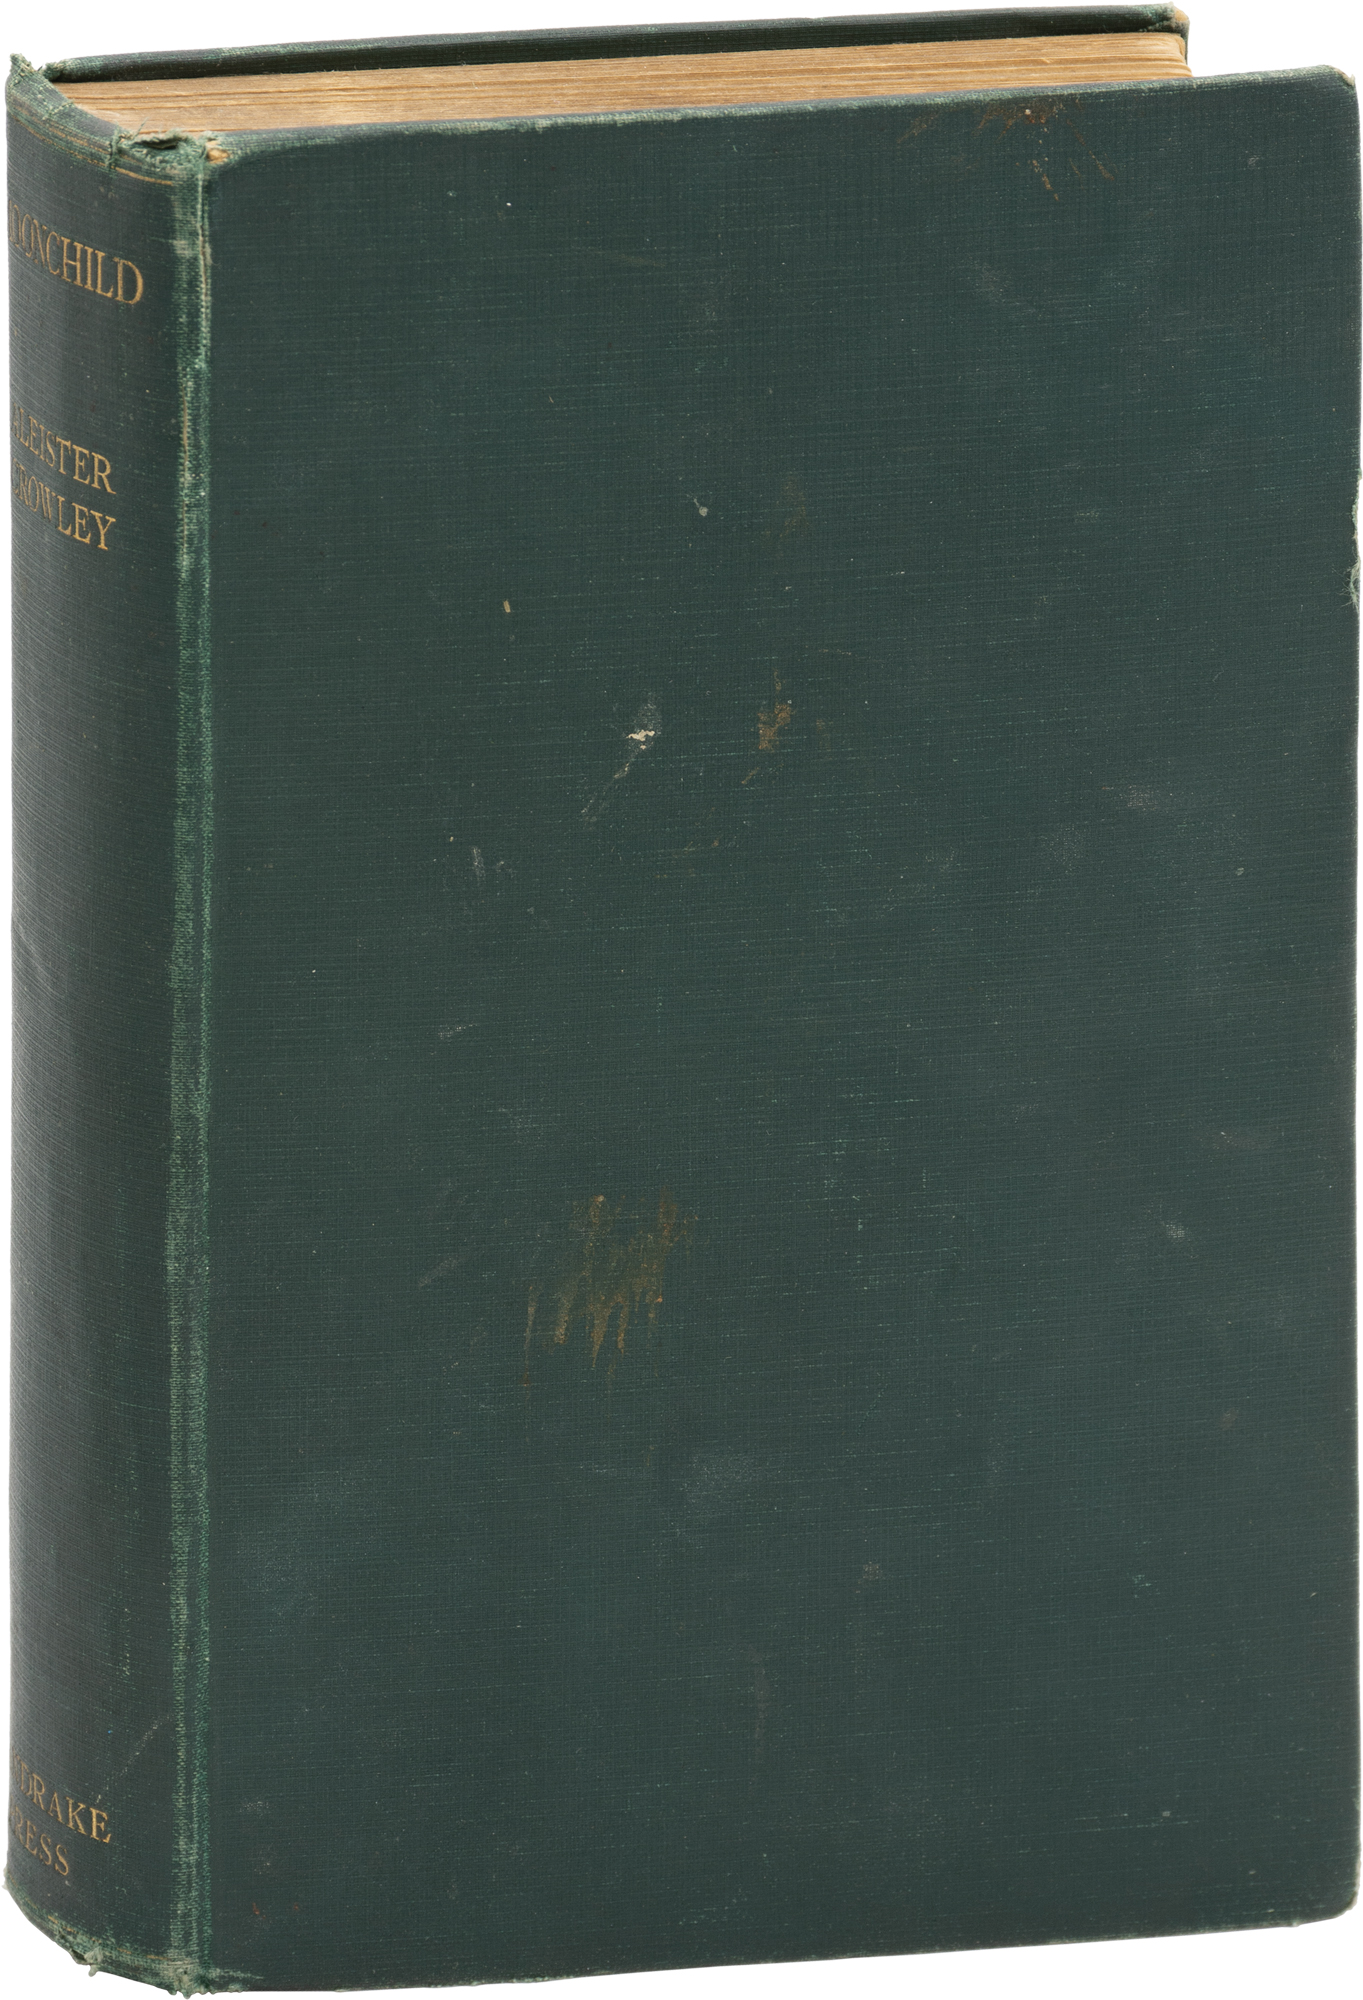 Moonchild (First Edition) by Aleister Crowley: (1929) | Royal Books ...